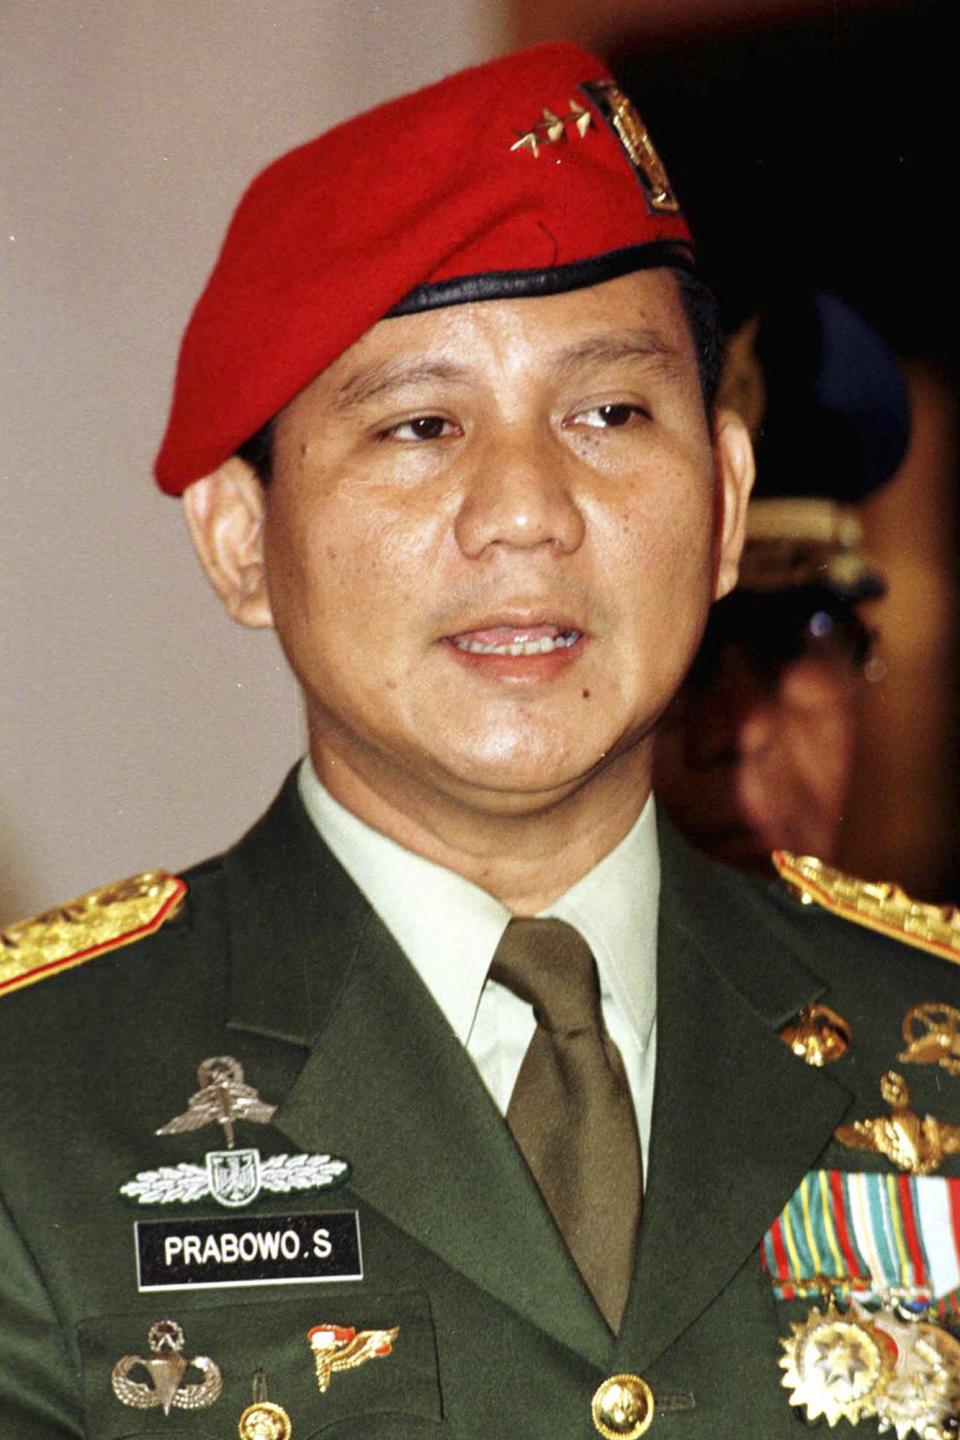 FILE - Lt. Gen. Prabowo Subianto, the commander of the Army Strategic Reserve Command (KOSTRAD) is pictured at his installation ceremony in Jakarta, Feb. 16, 1998. Defense Minister Subianto, a wealthy ex-general with ties to both Indonesia’s popular outgoing president and its dictatorial past looks set to be its next president, after unofficial tallies showed him taking a clear majority in the first round of voting. (AP Photo/Muchtar Zakaria, File)